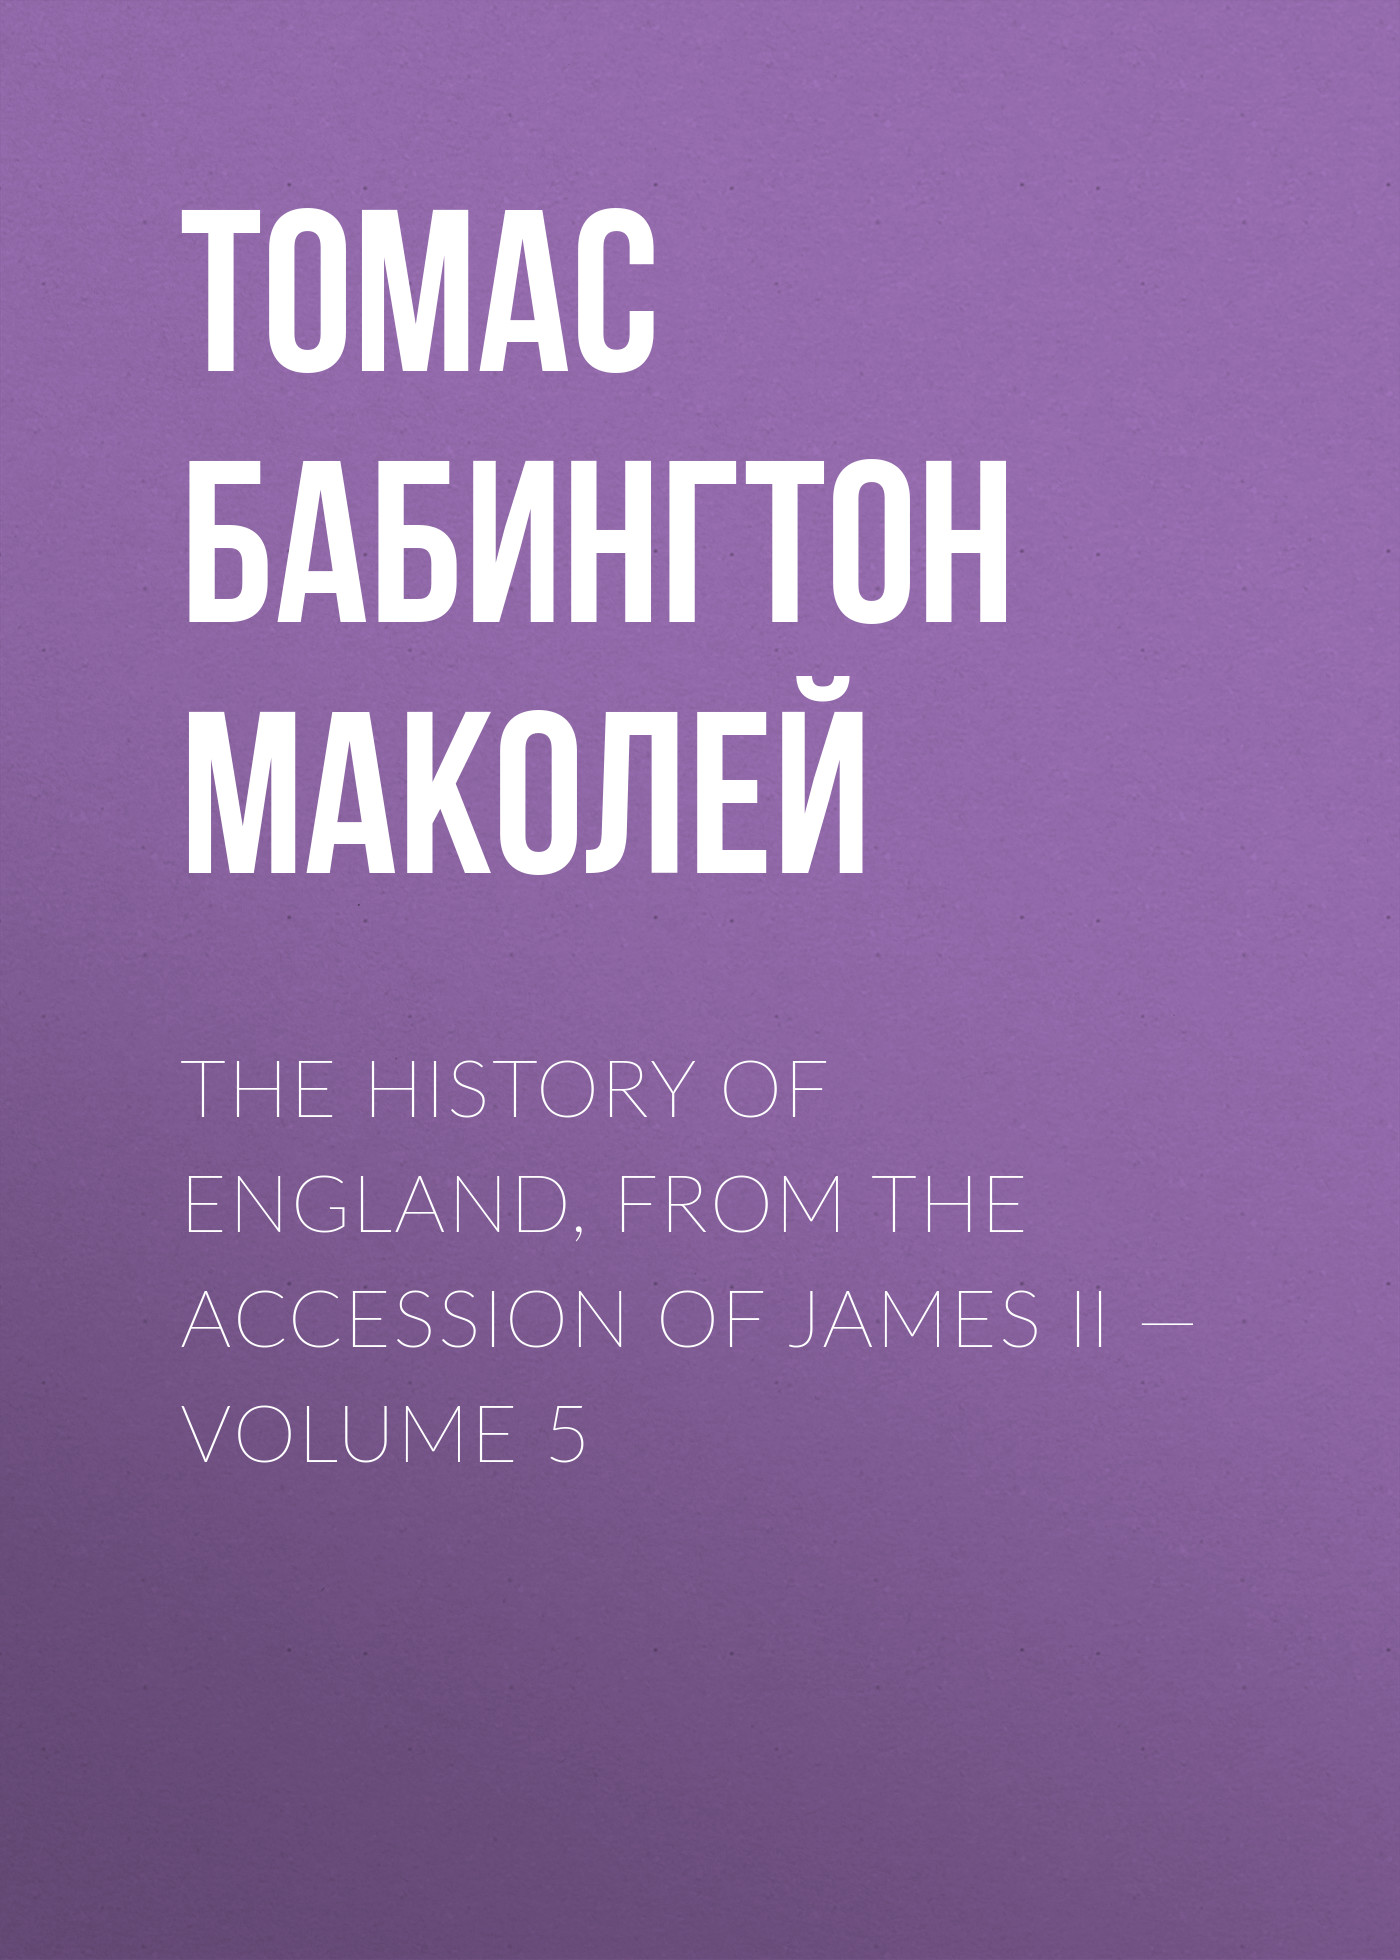 The History of England, from the Accession of James II— Volume 5